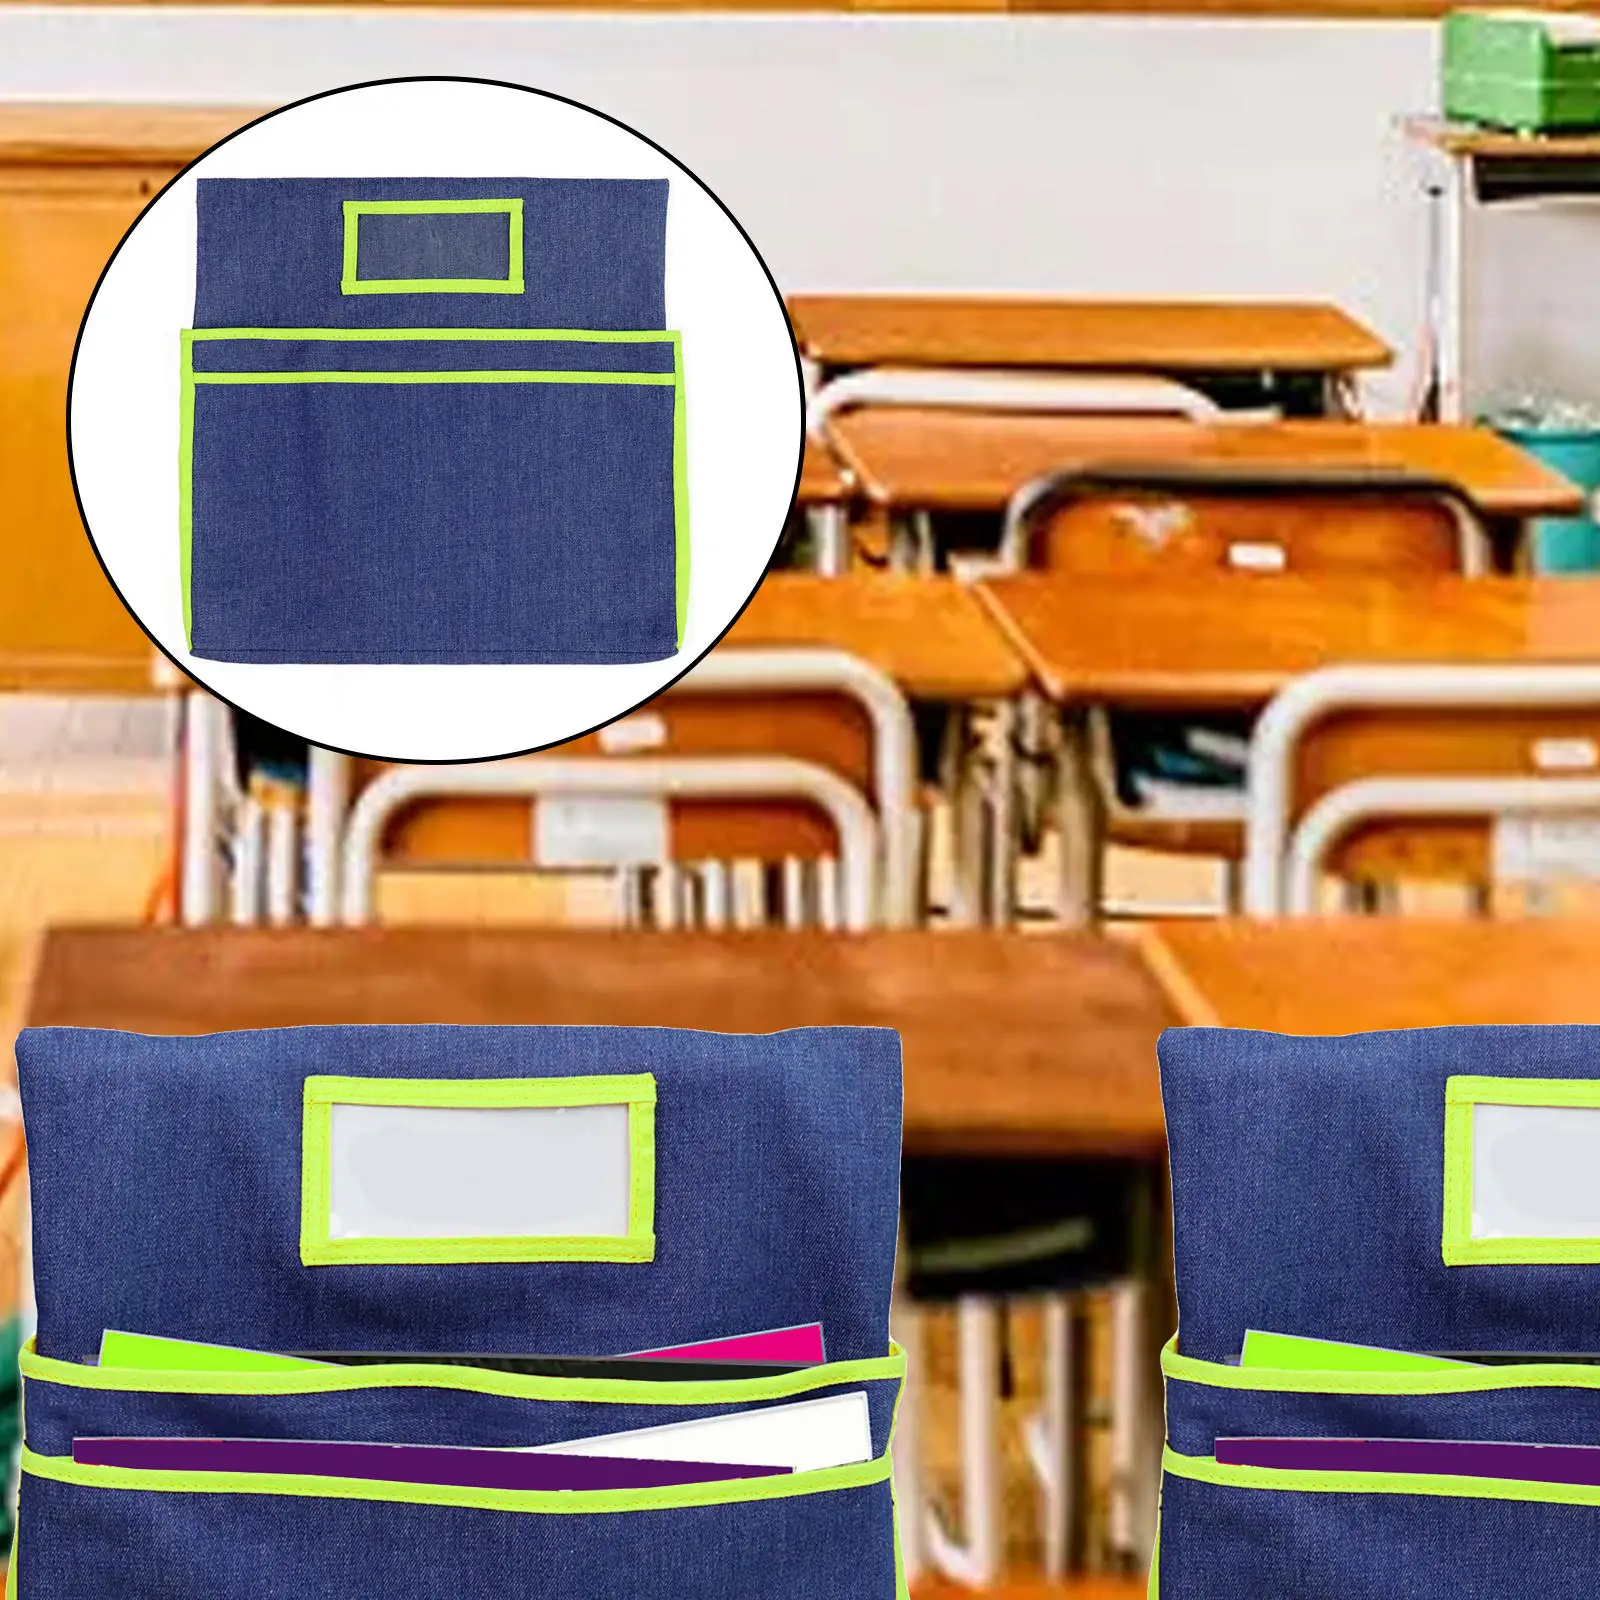 Hanging Storage Pocket Chart School Seat Sacks with 2 Pockets 1 Nametag Chair Pockets for Document Assignments Office School